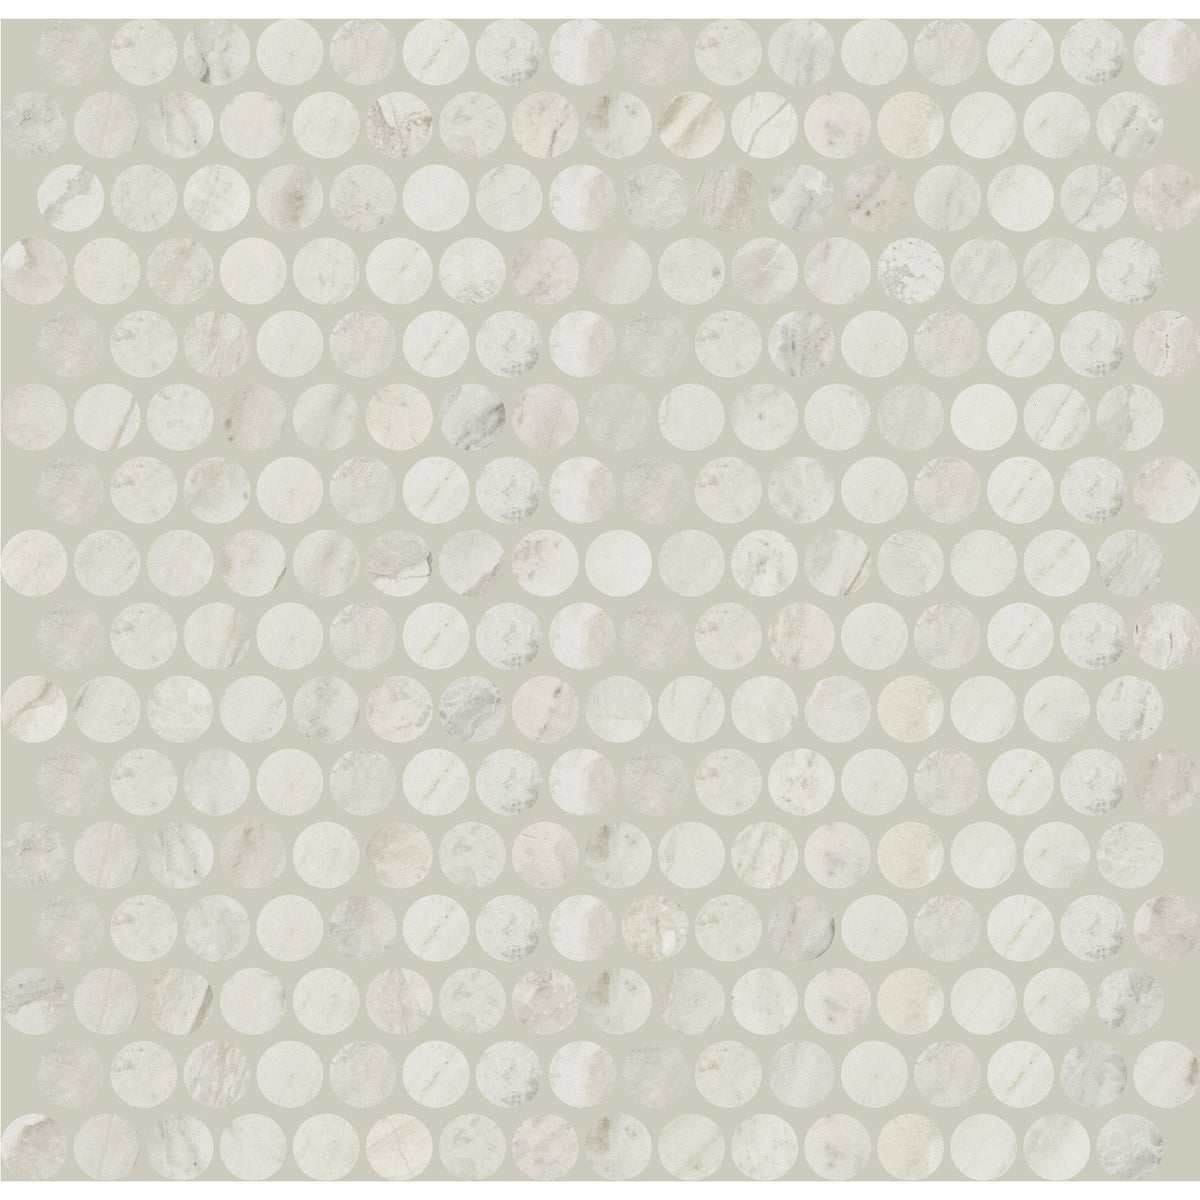 Daltile - Famed 3/4 in. x 3/4 in. Glazed Ceramic Penny Round Mosaic - Iconic